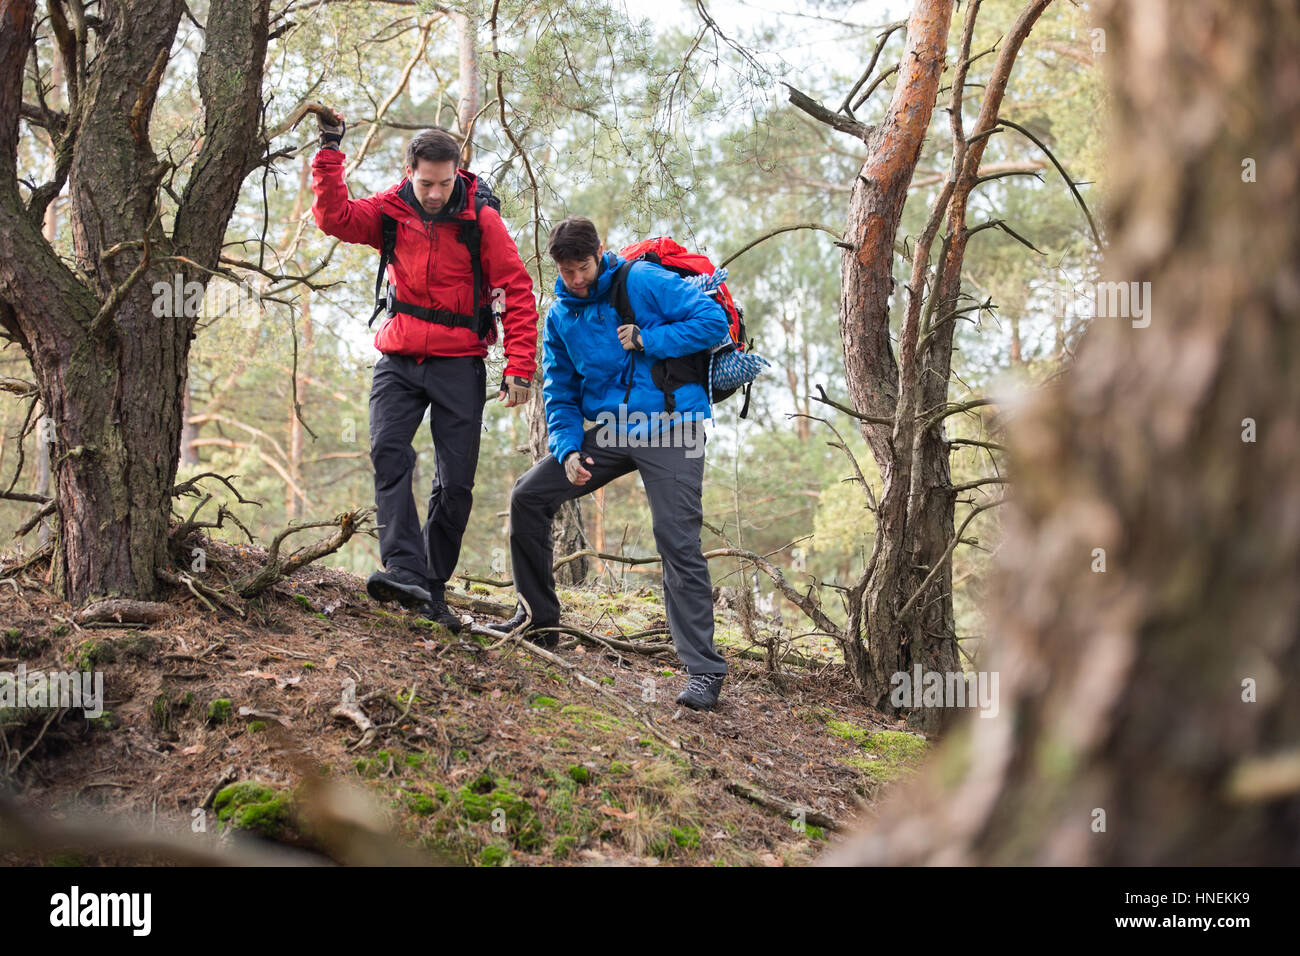 Male backpackers hiking in forest Stock Photo